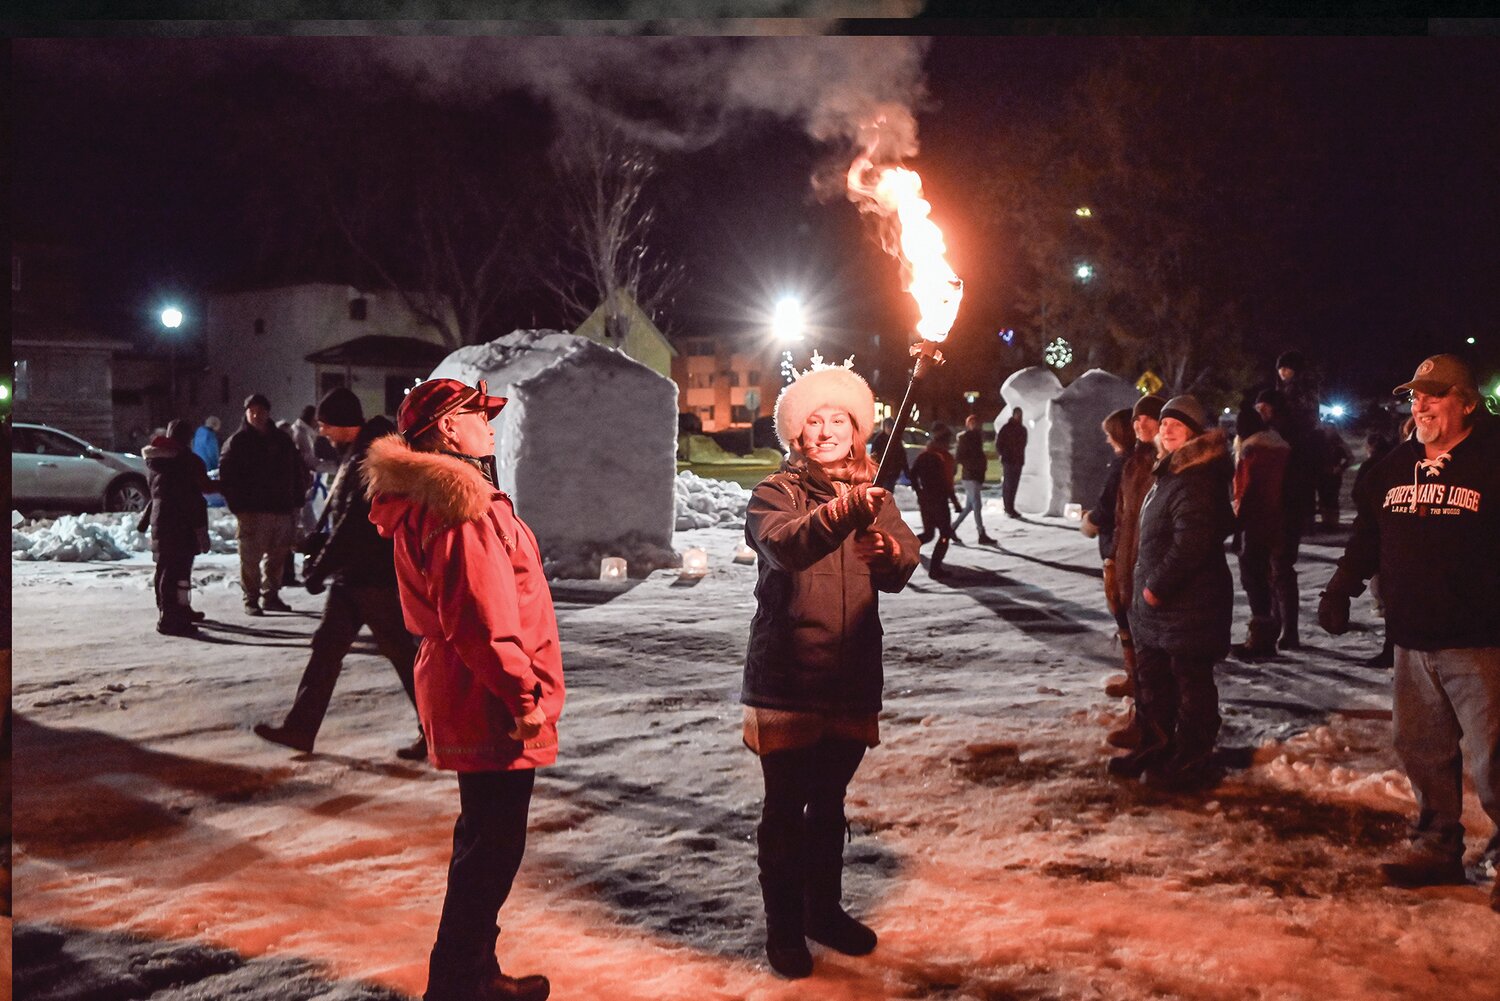 Ely podcaster and Boundary Waters Connect manager, Lacey Squier, was this year’s Ely Winter Festival Grand Marshal, shown here with the torch to light the ceremonial fire to officially start the festival on Friday evening.